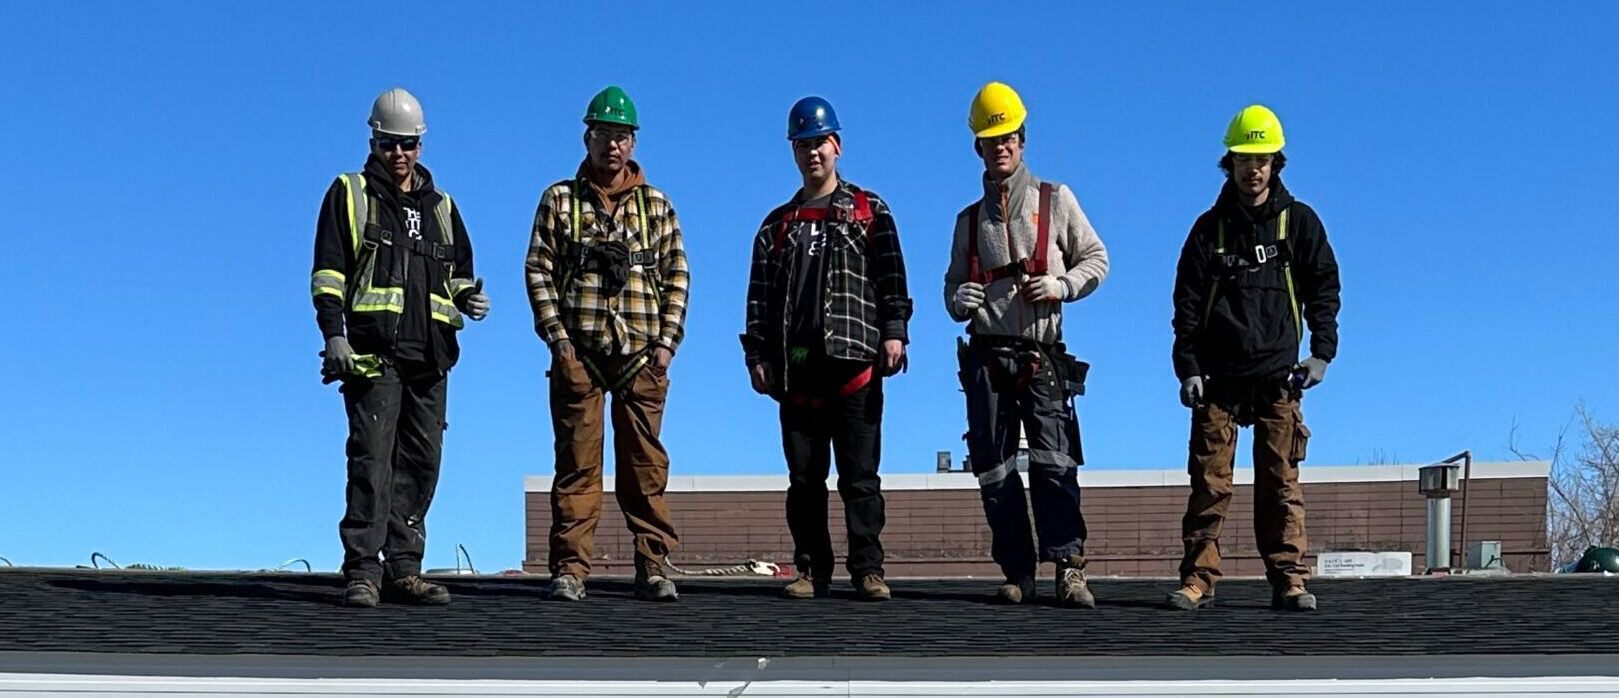 Indigenous Training Center Crew smiling on a rooftop